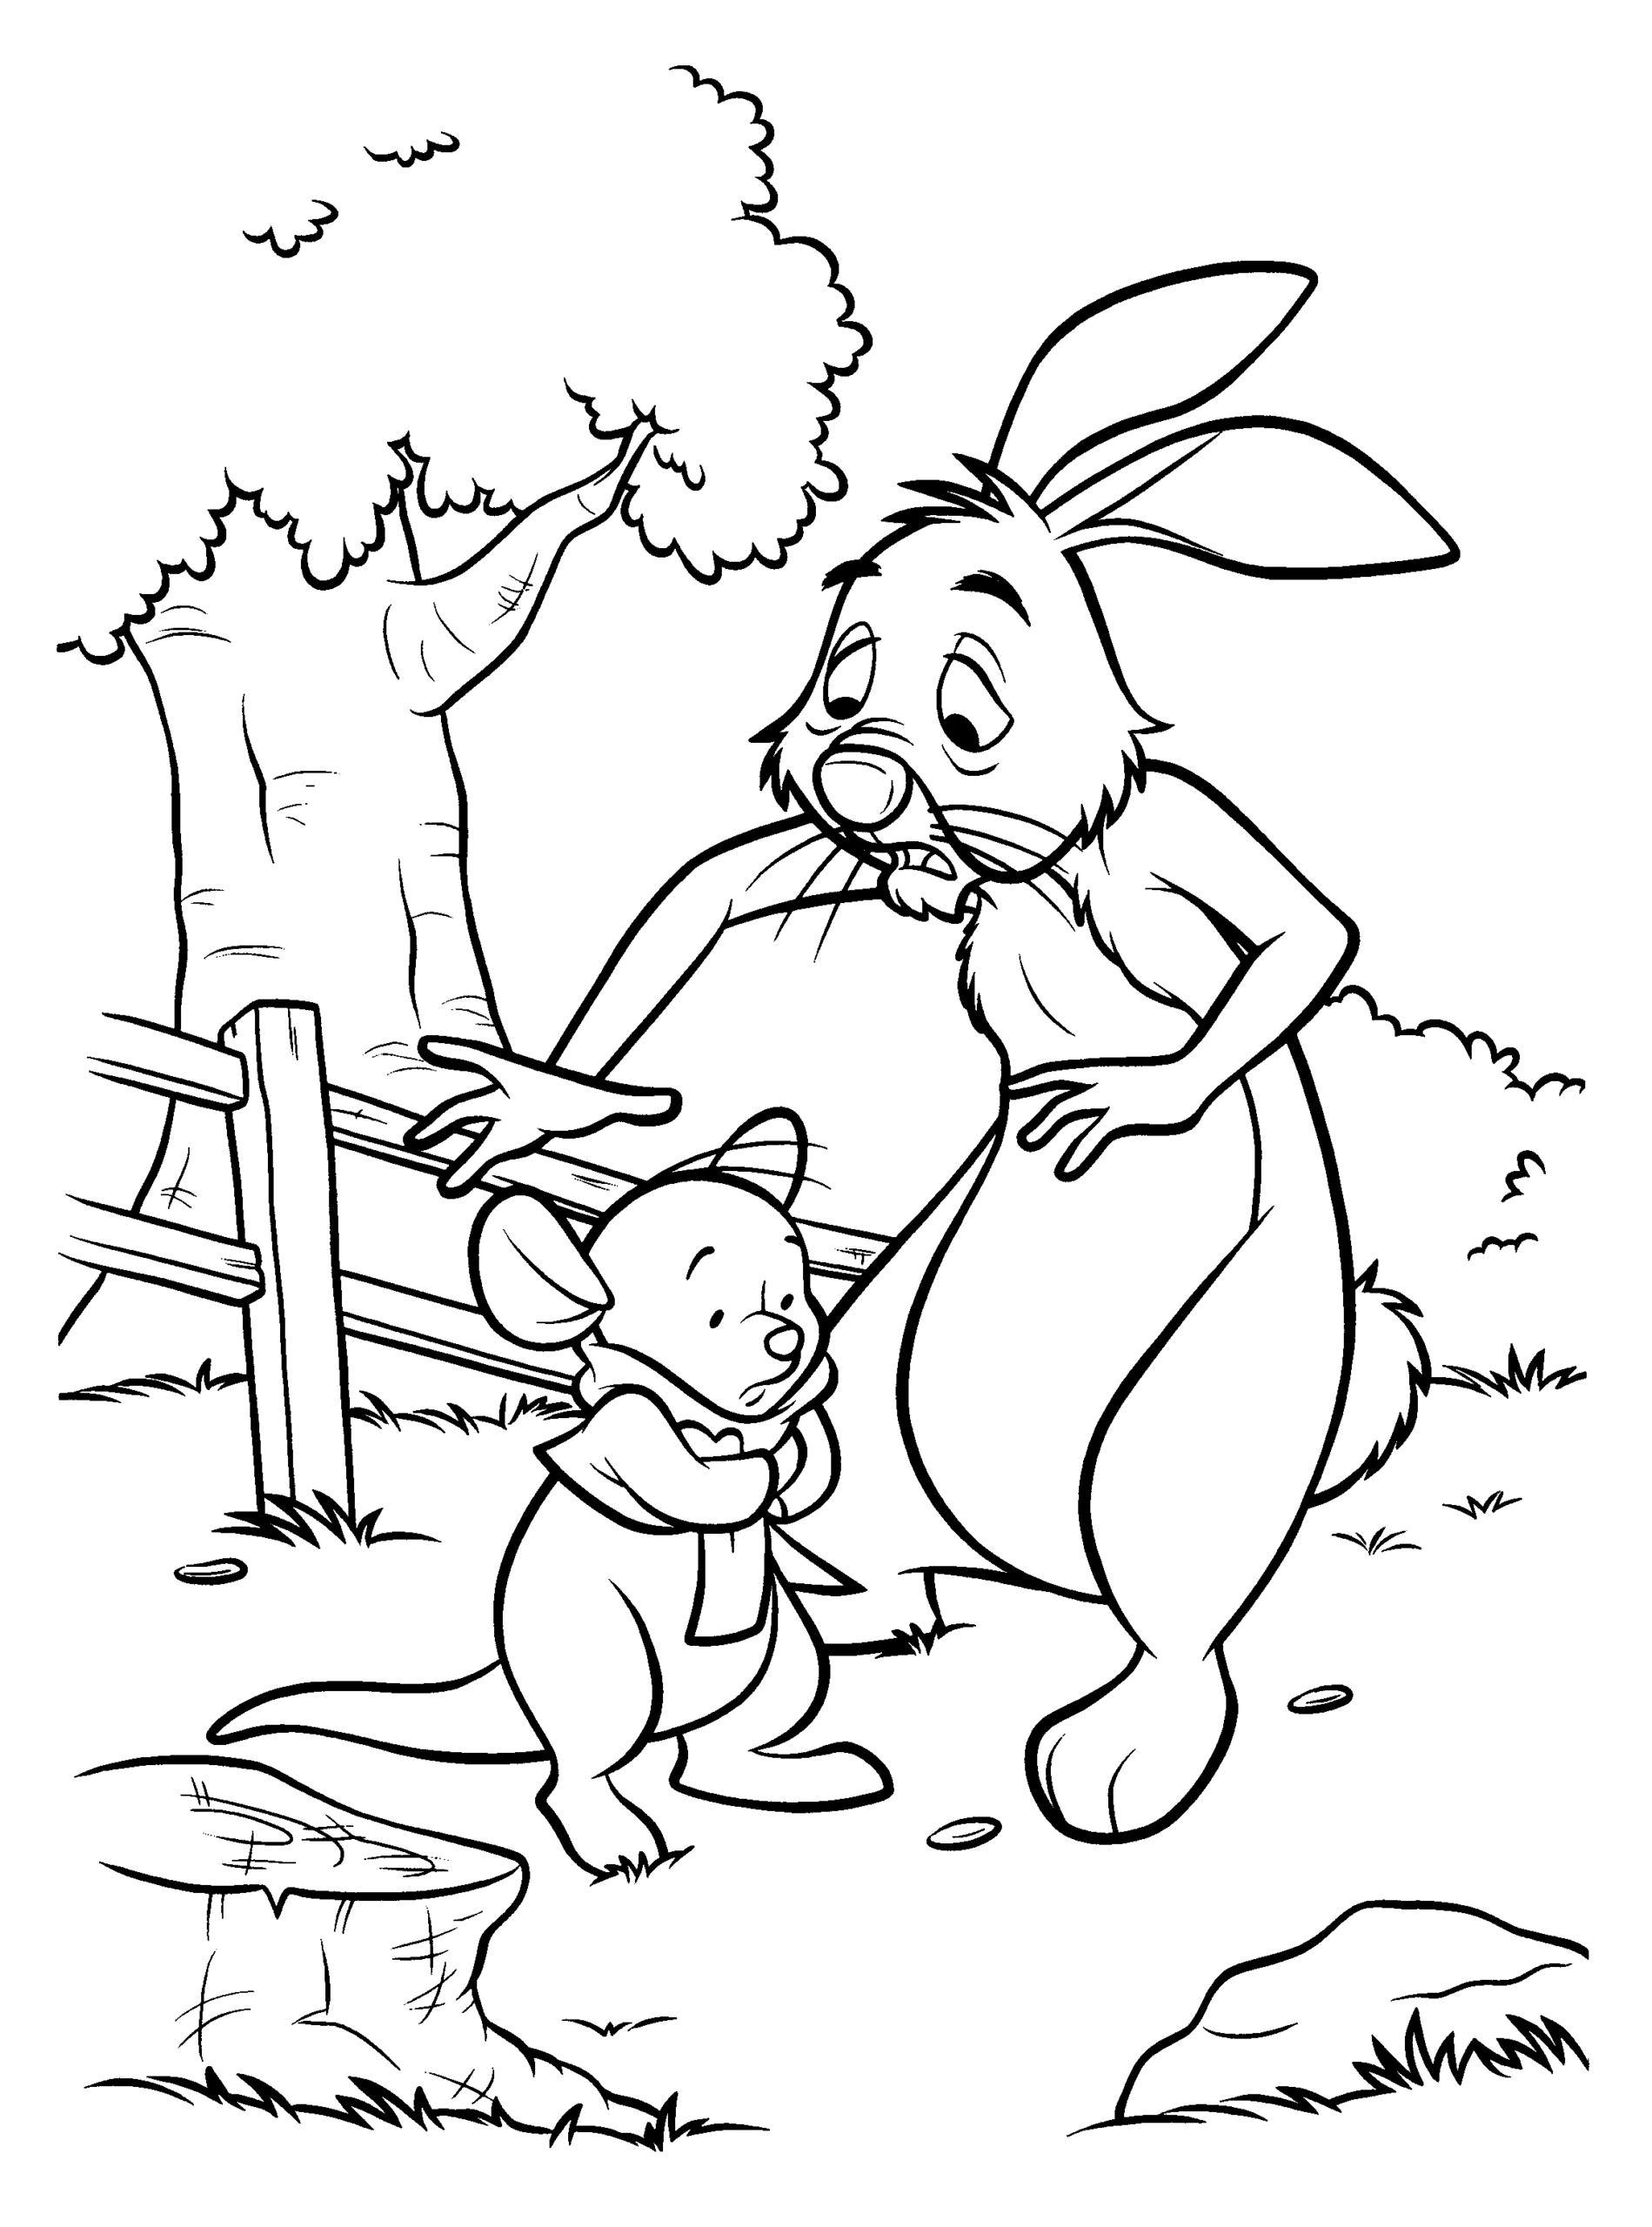 Winnie the Pooh Coloring Pages Cartoons winnie the pooh 16 Printable 2020 7108 Coloring4free